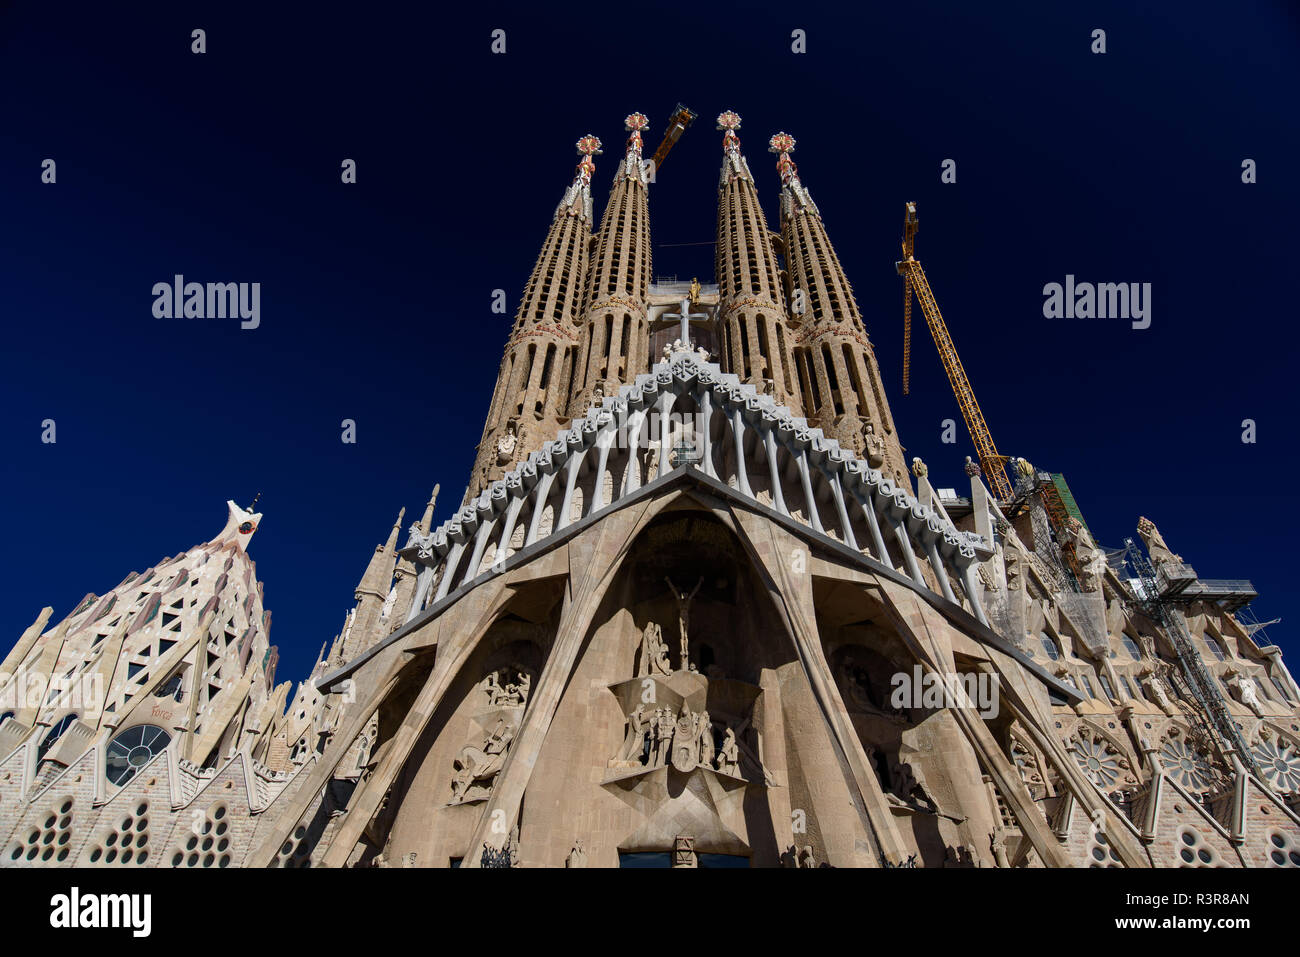 Passion Façade of Sagrada Familia, the cathedral designed by Gaudi in Barcelona, Spain Stock Photo